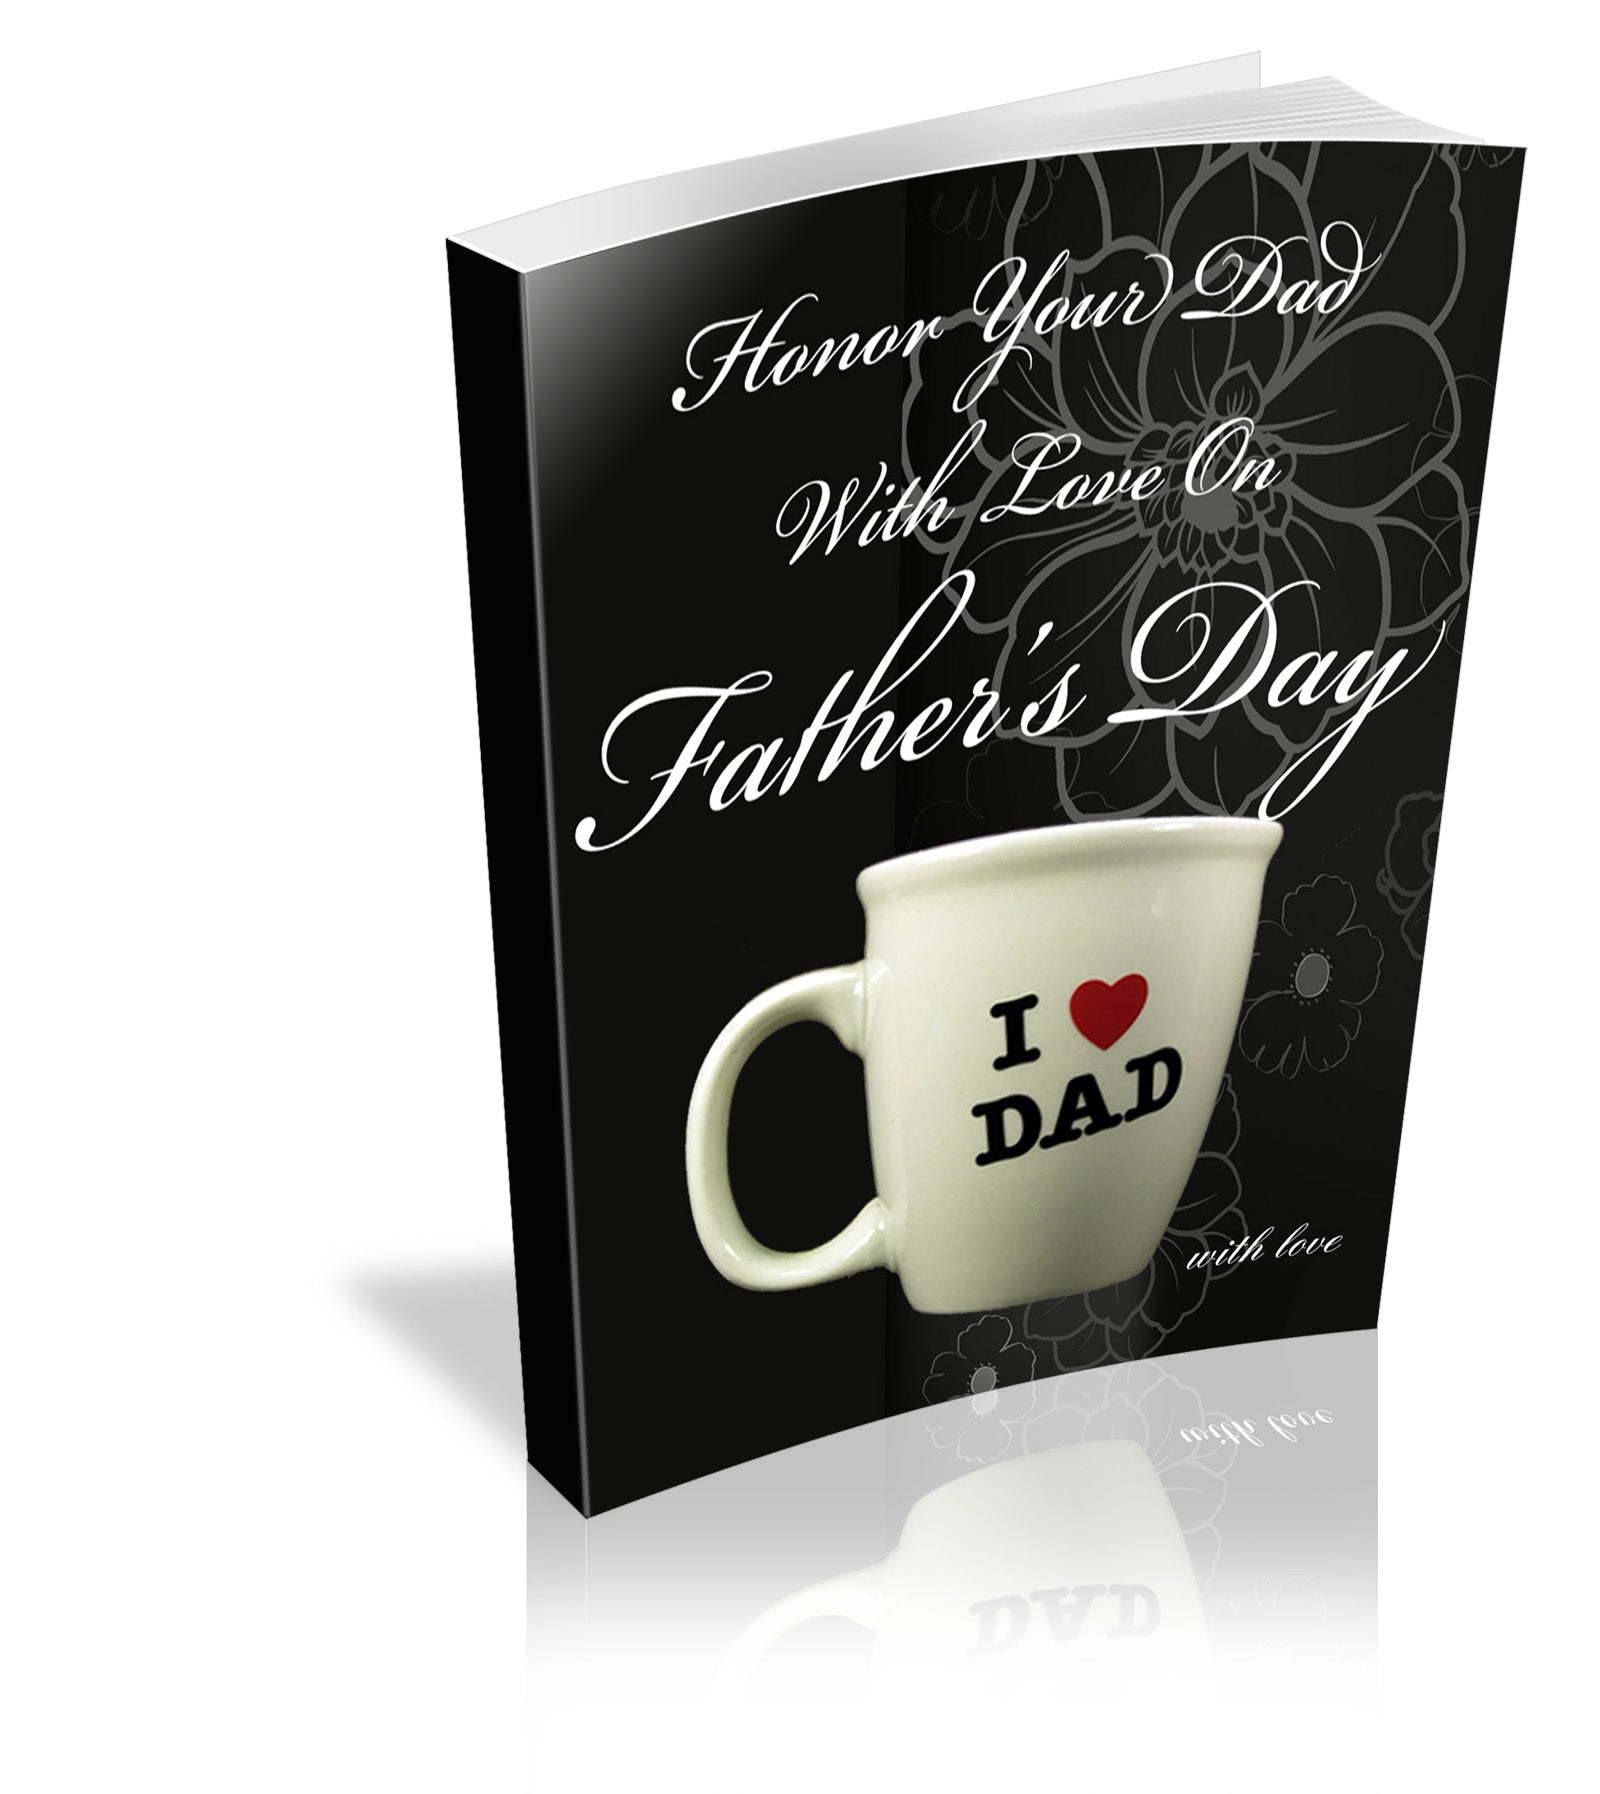 Honor Your Dad on Father's Day eBOOK